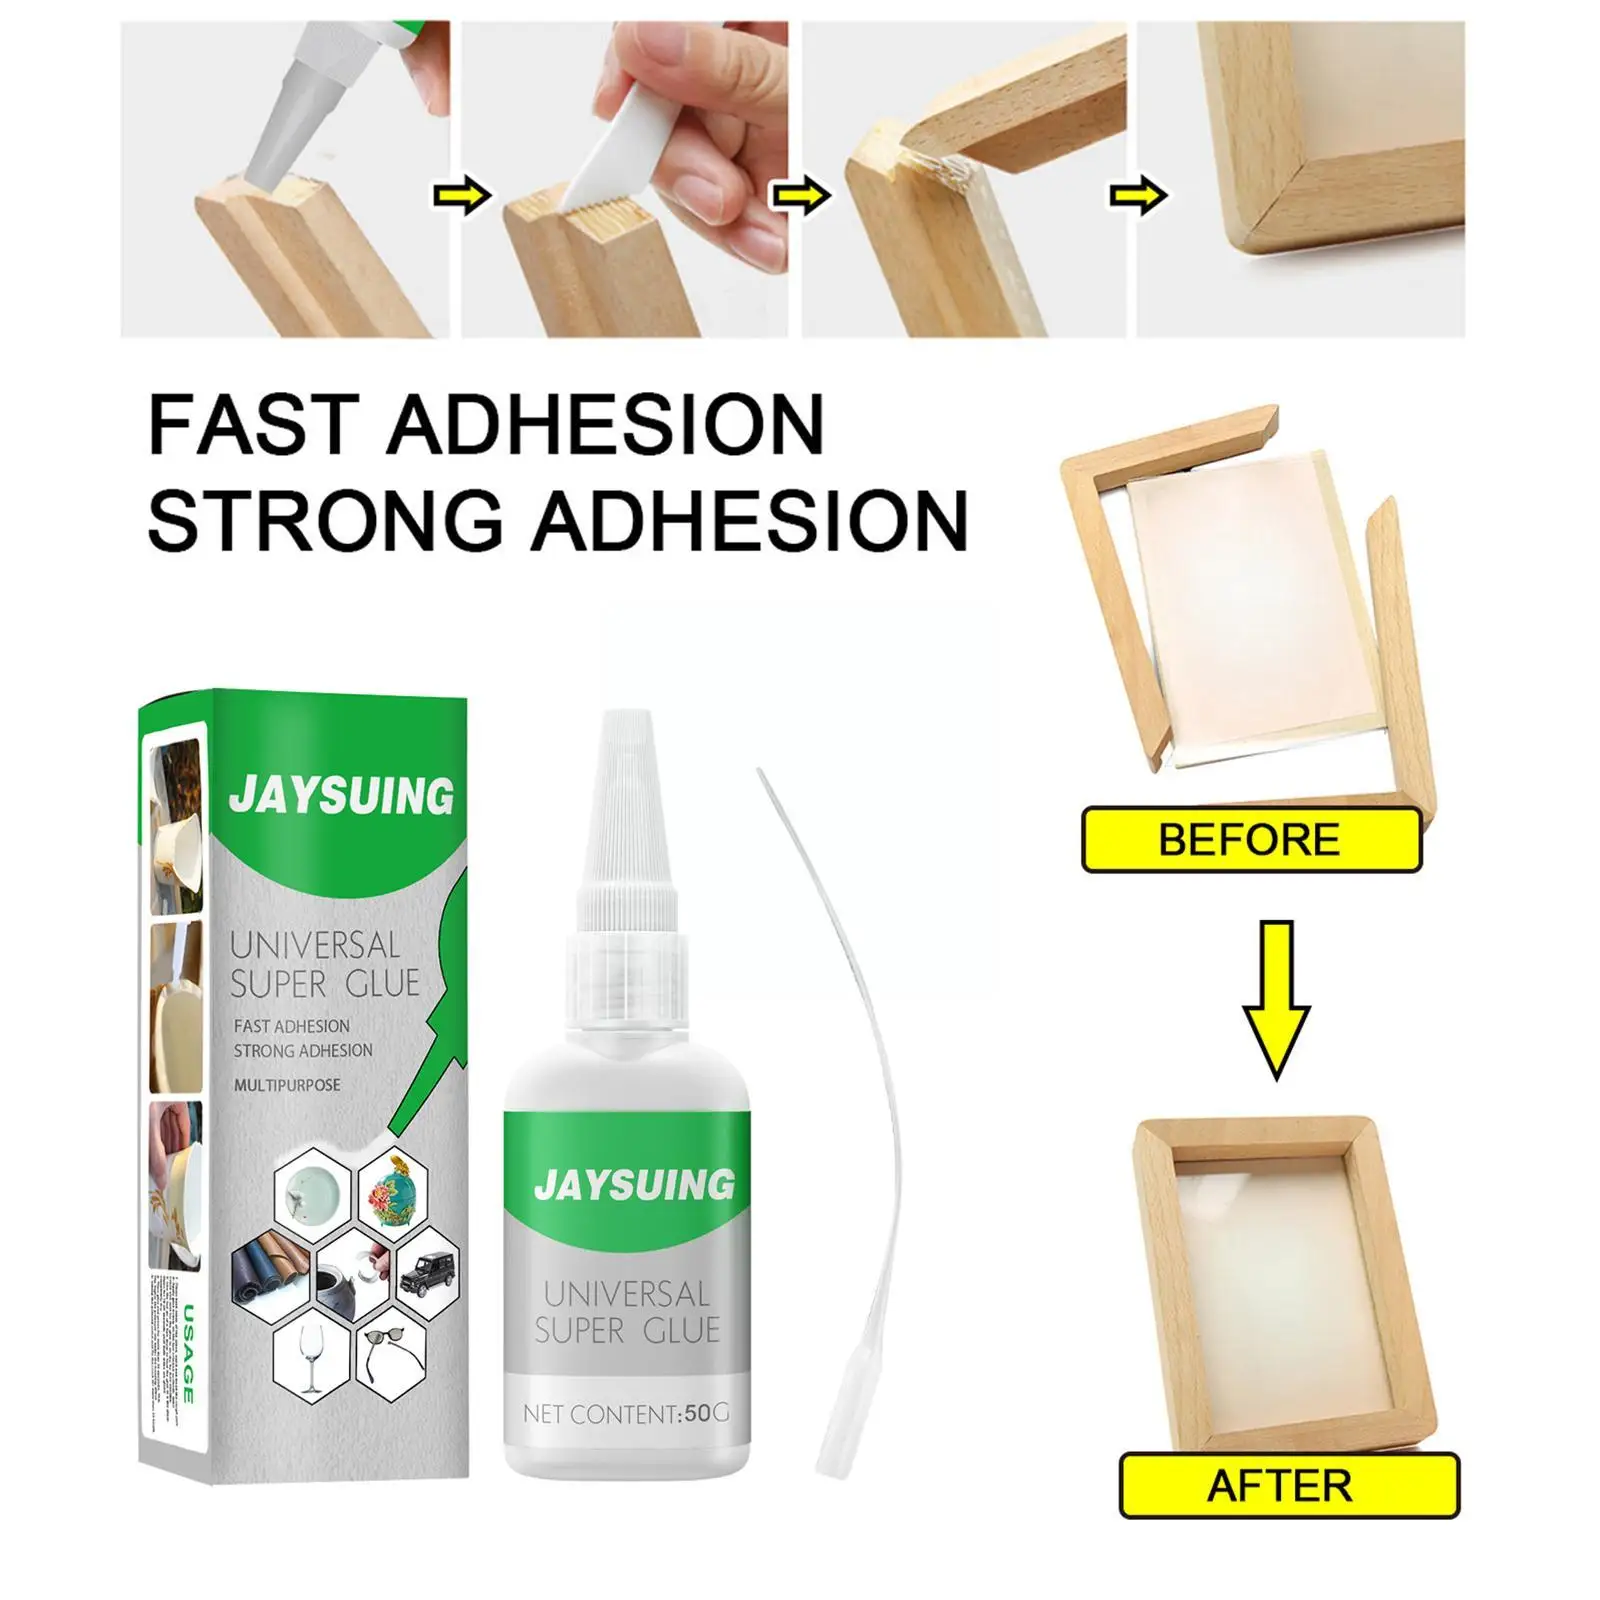 Strong Multi Purpose Adhesive Oily Gum Glue Self-adhesive Street Stall Shoes Instant Bonding For Repair Of Damaged Items, G B2i1